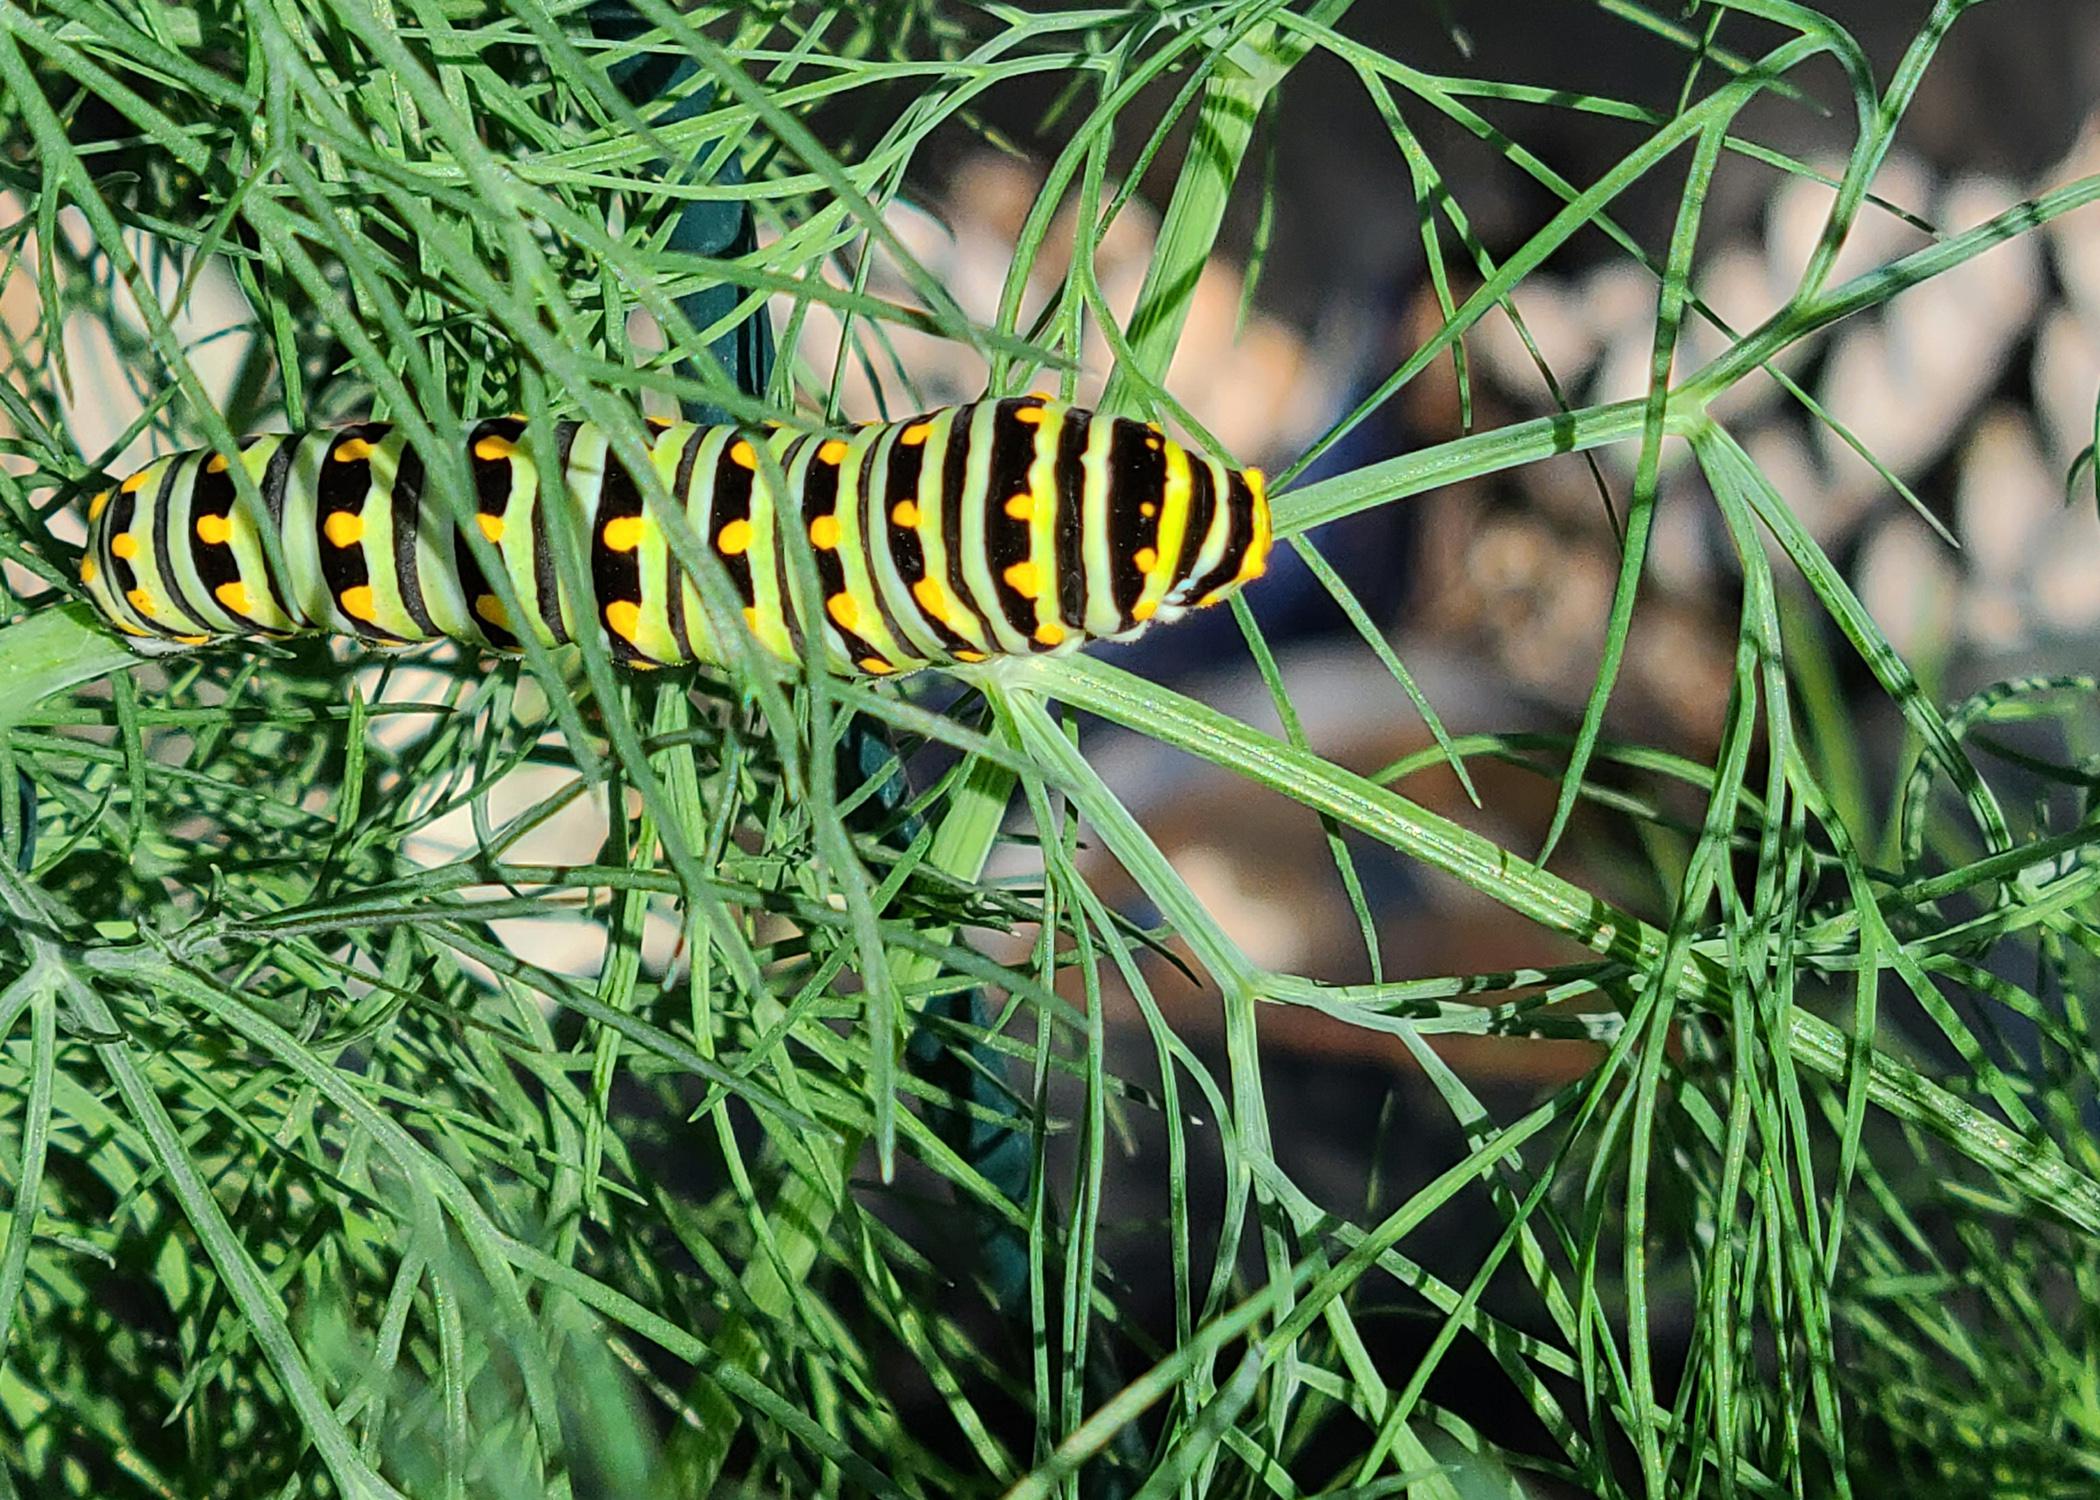 A large, striped butterfly rests on a green plant.